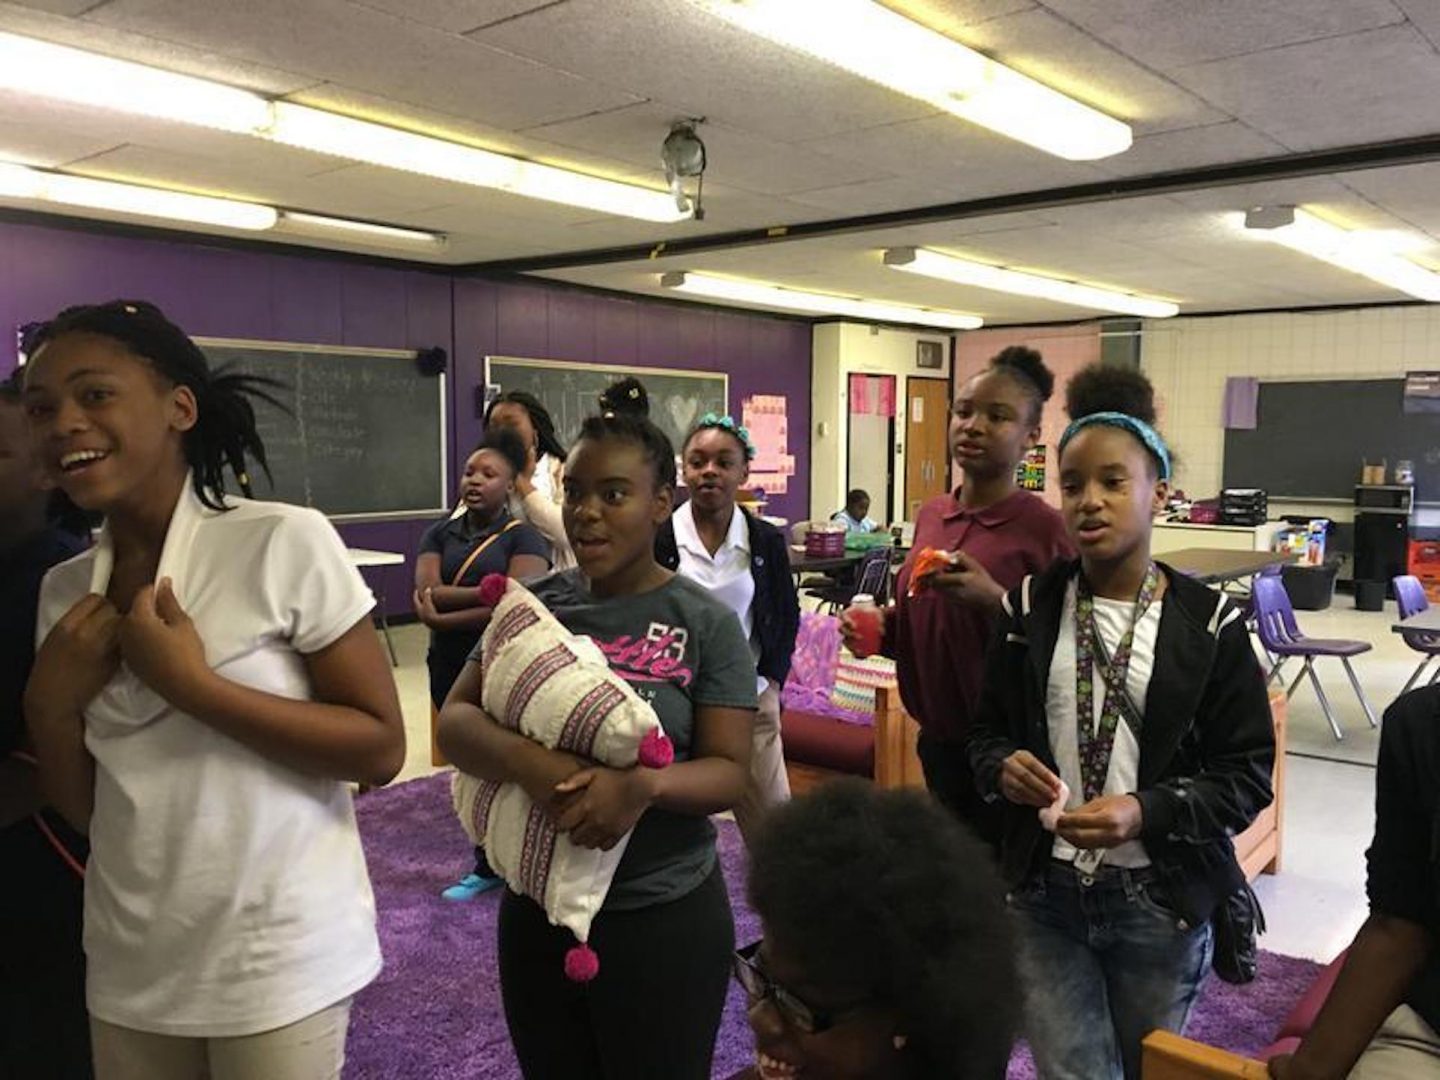 The North Side-based Gwen’s Girls offers services to prevent girls from entering the juvenile justice system. In 2016, the group's CEO, Kathi Elliot, helped to form the Black Girls Equity Alliance, whose new report details racial imbalances in the system.